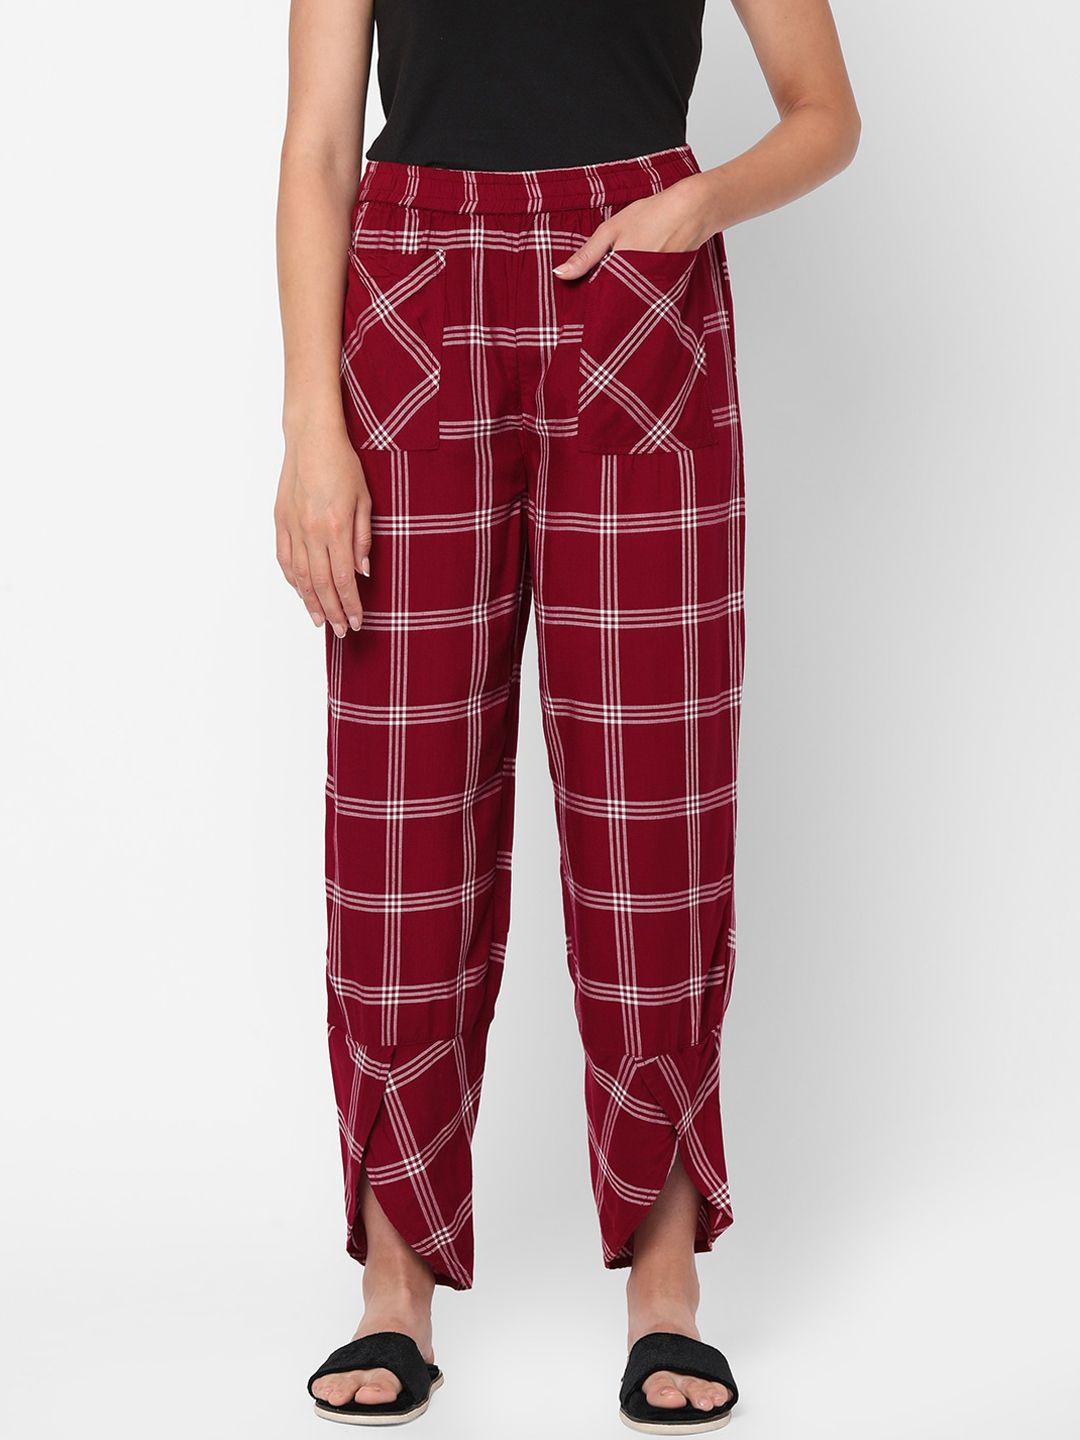 mystere-paris-women-red-checked-lounge-pants